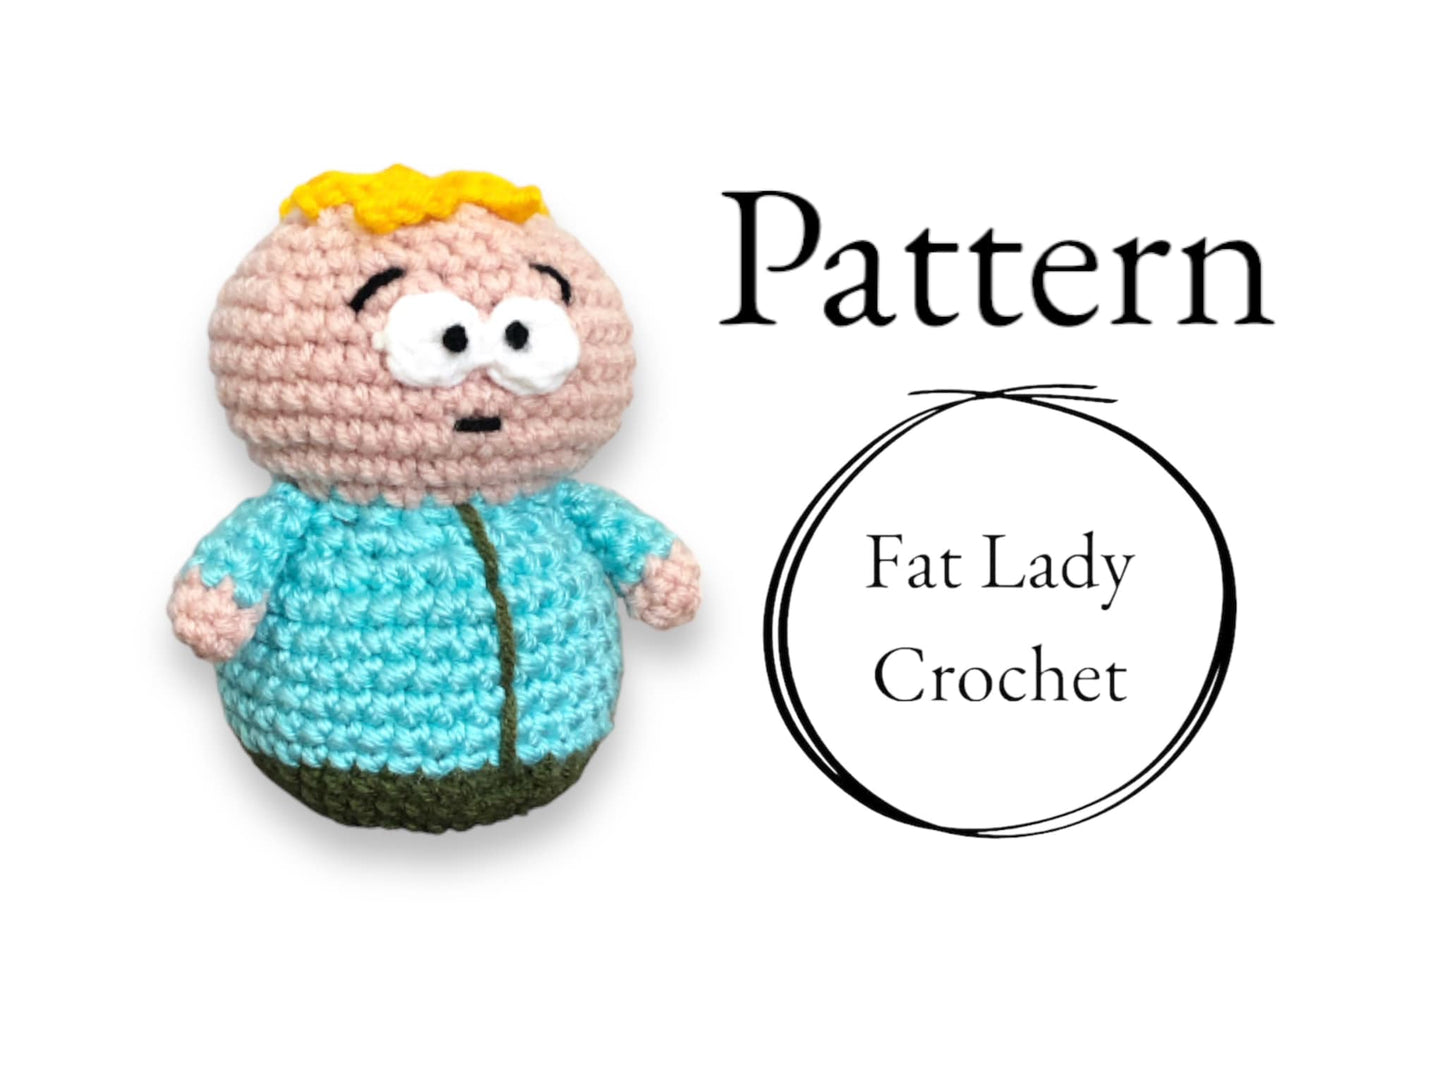 PATTERN: Butters South Park